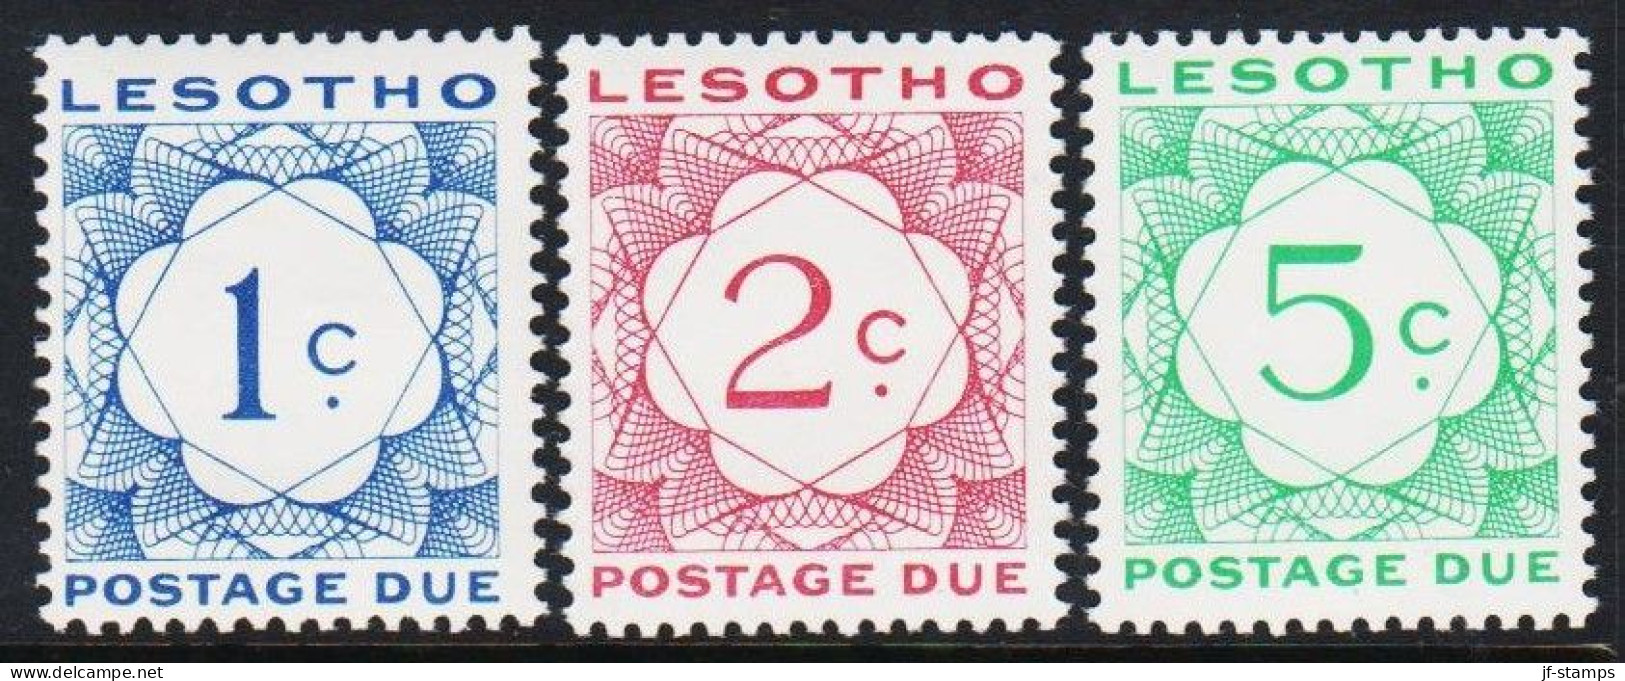 1967. LESOTHO. POSTAGE DUE, Complete Set With 3 Stamps. Never Hinged.  (Michel Porto 3-5) - JF544638 - Lesotho (1966-...)